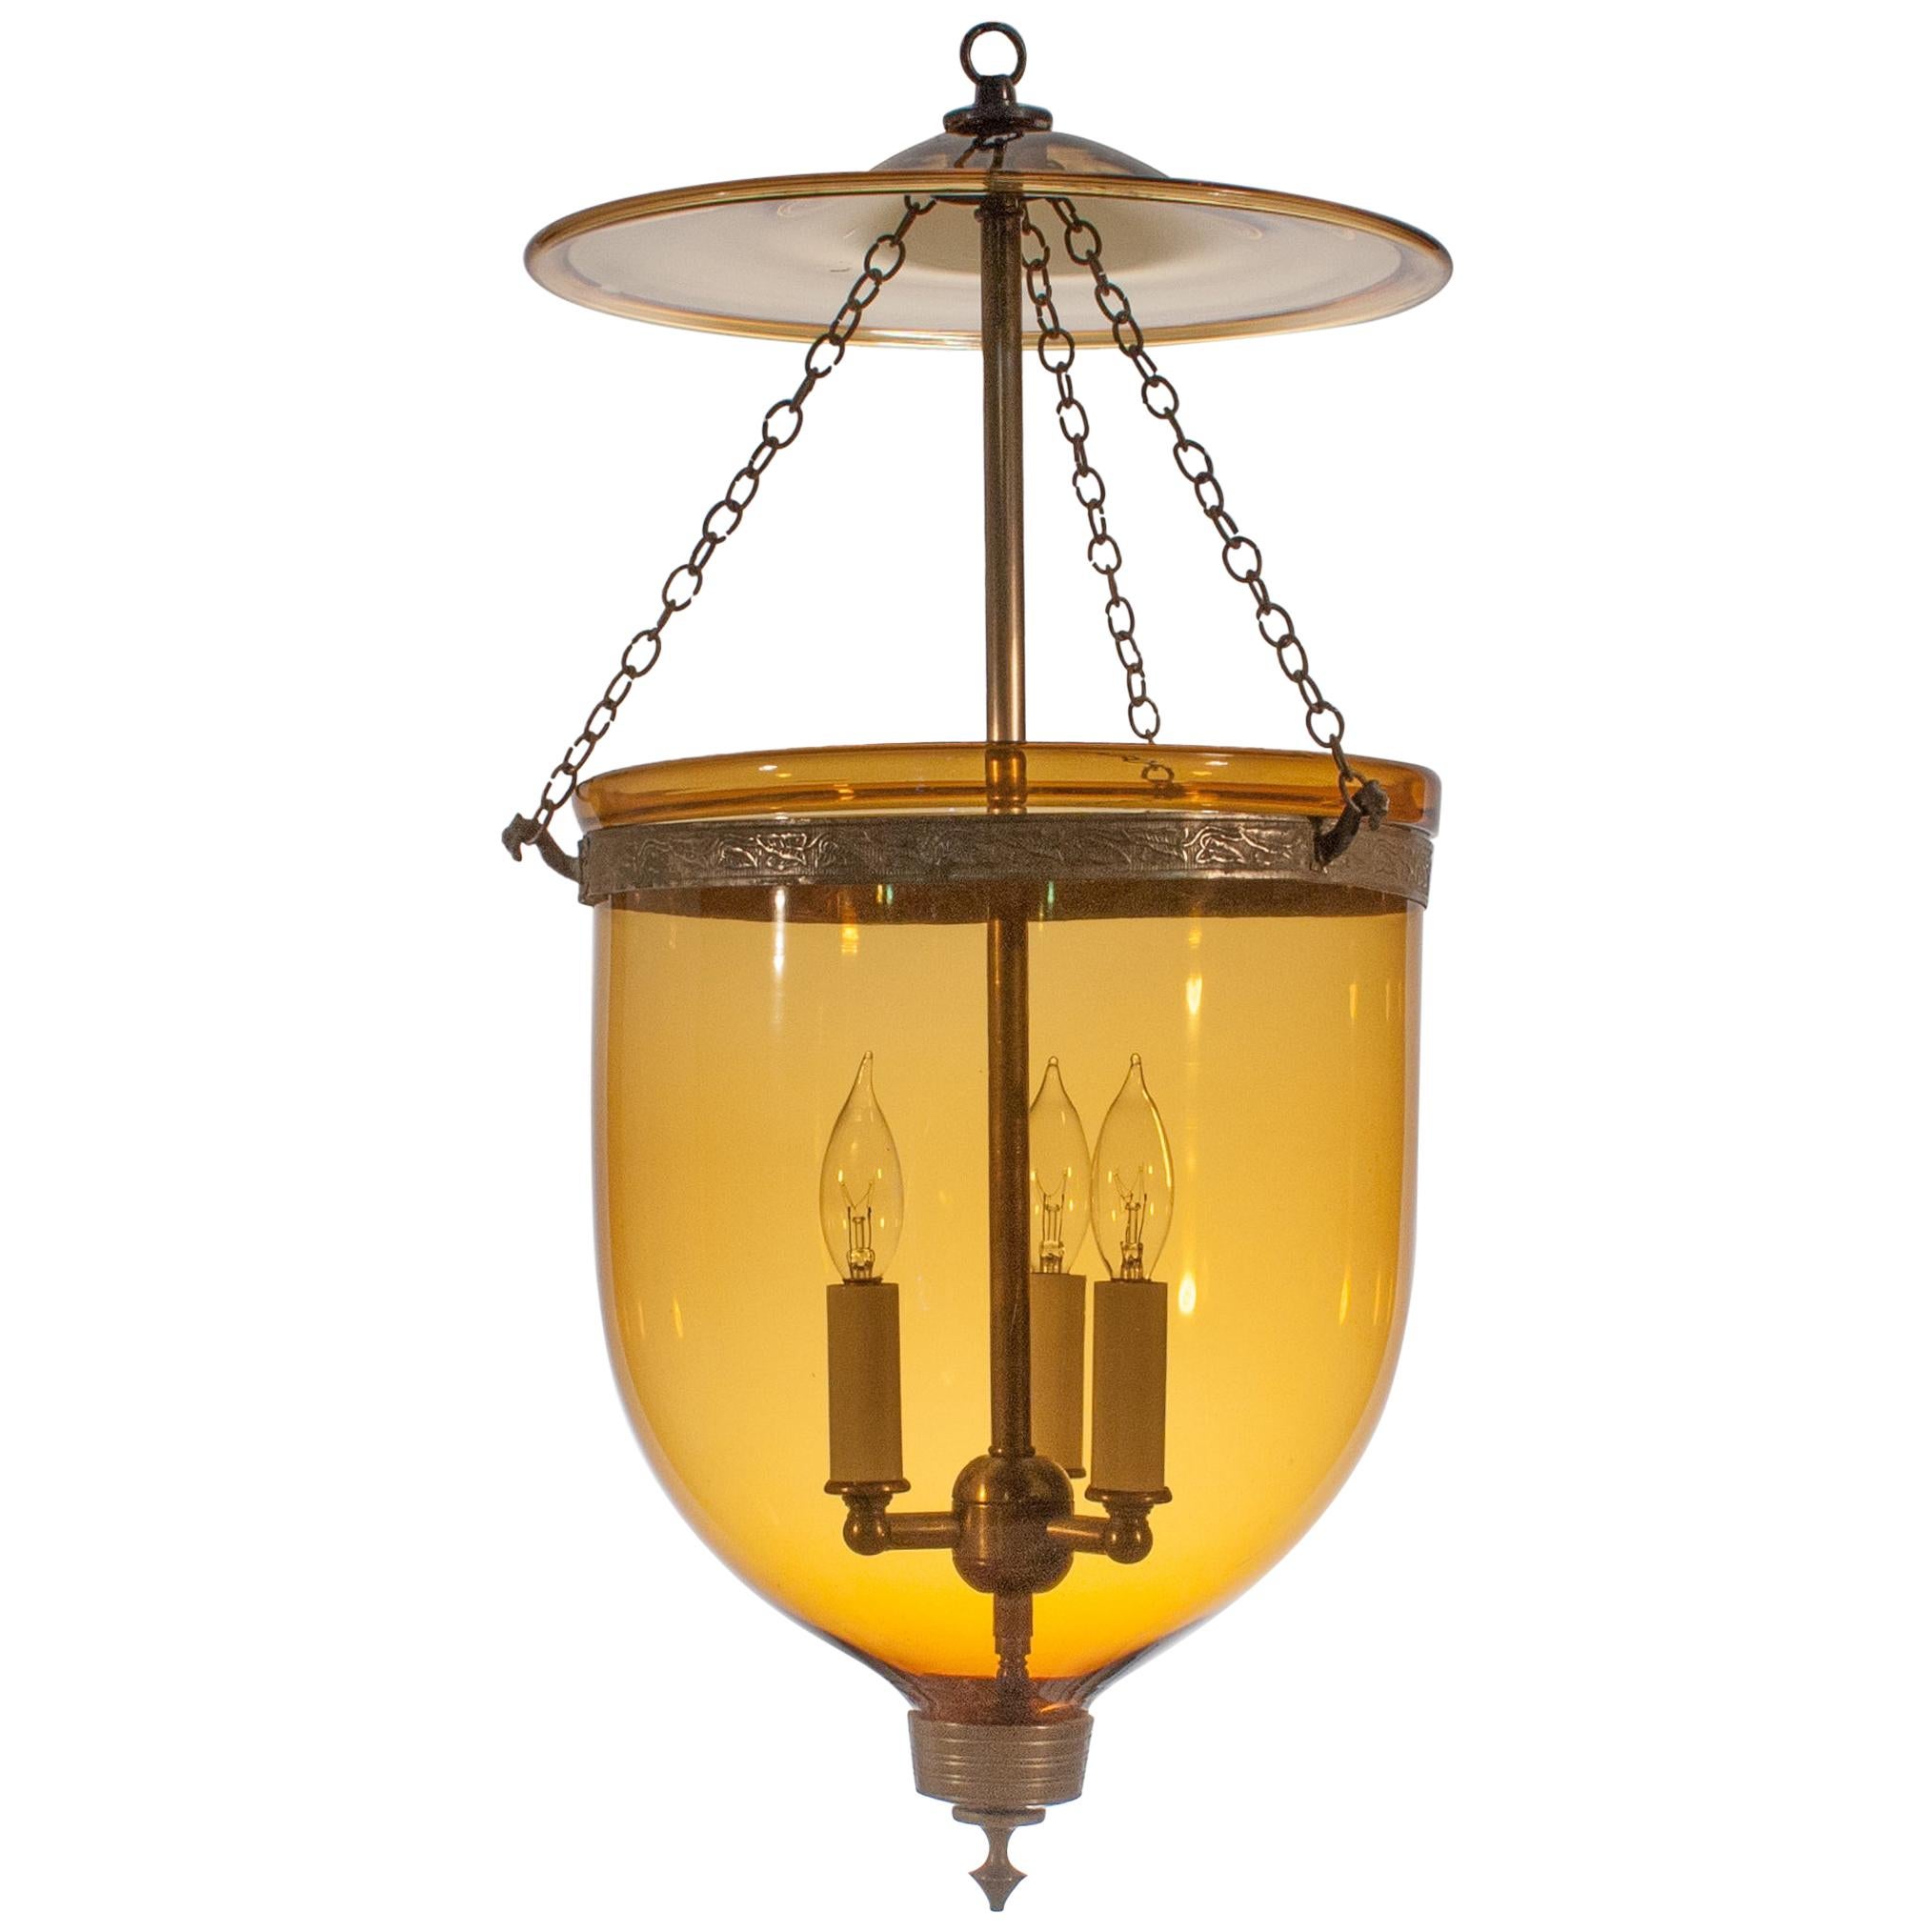 Antique Bell Jar Lantern with Amber Colored Glass